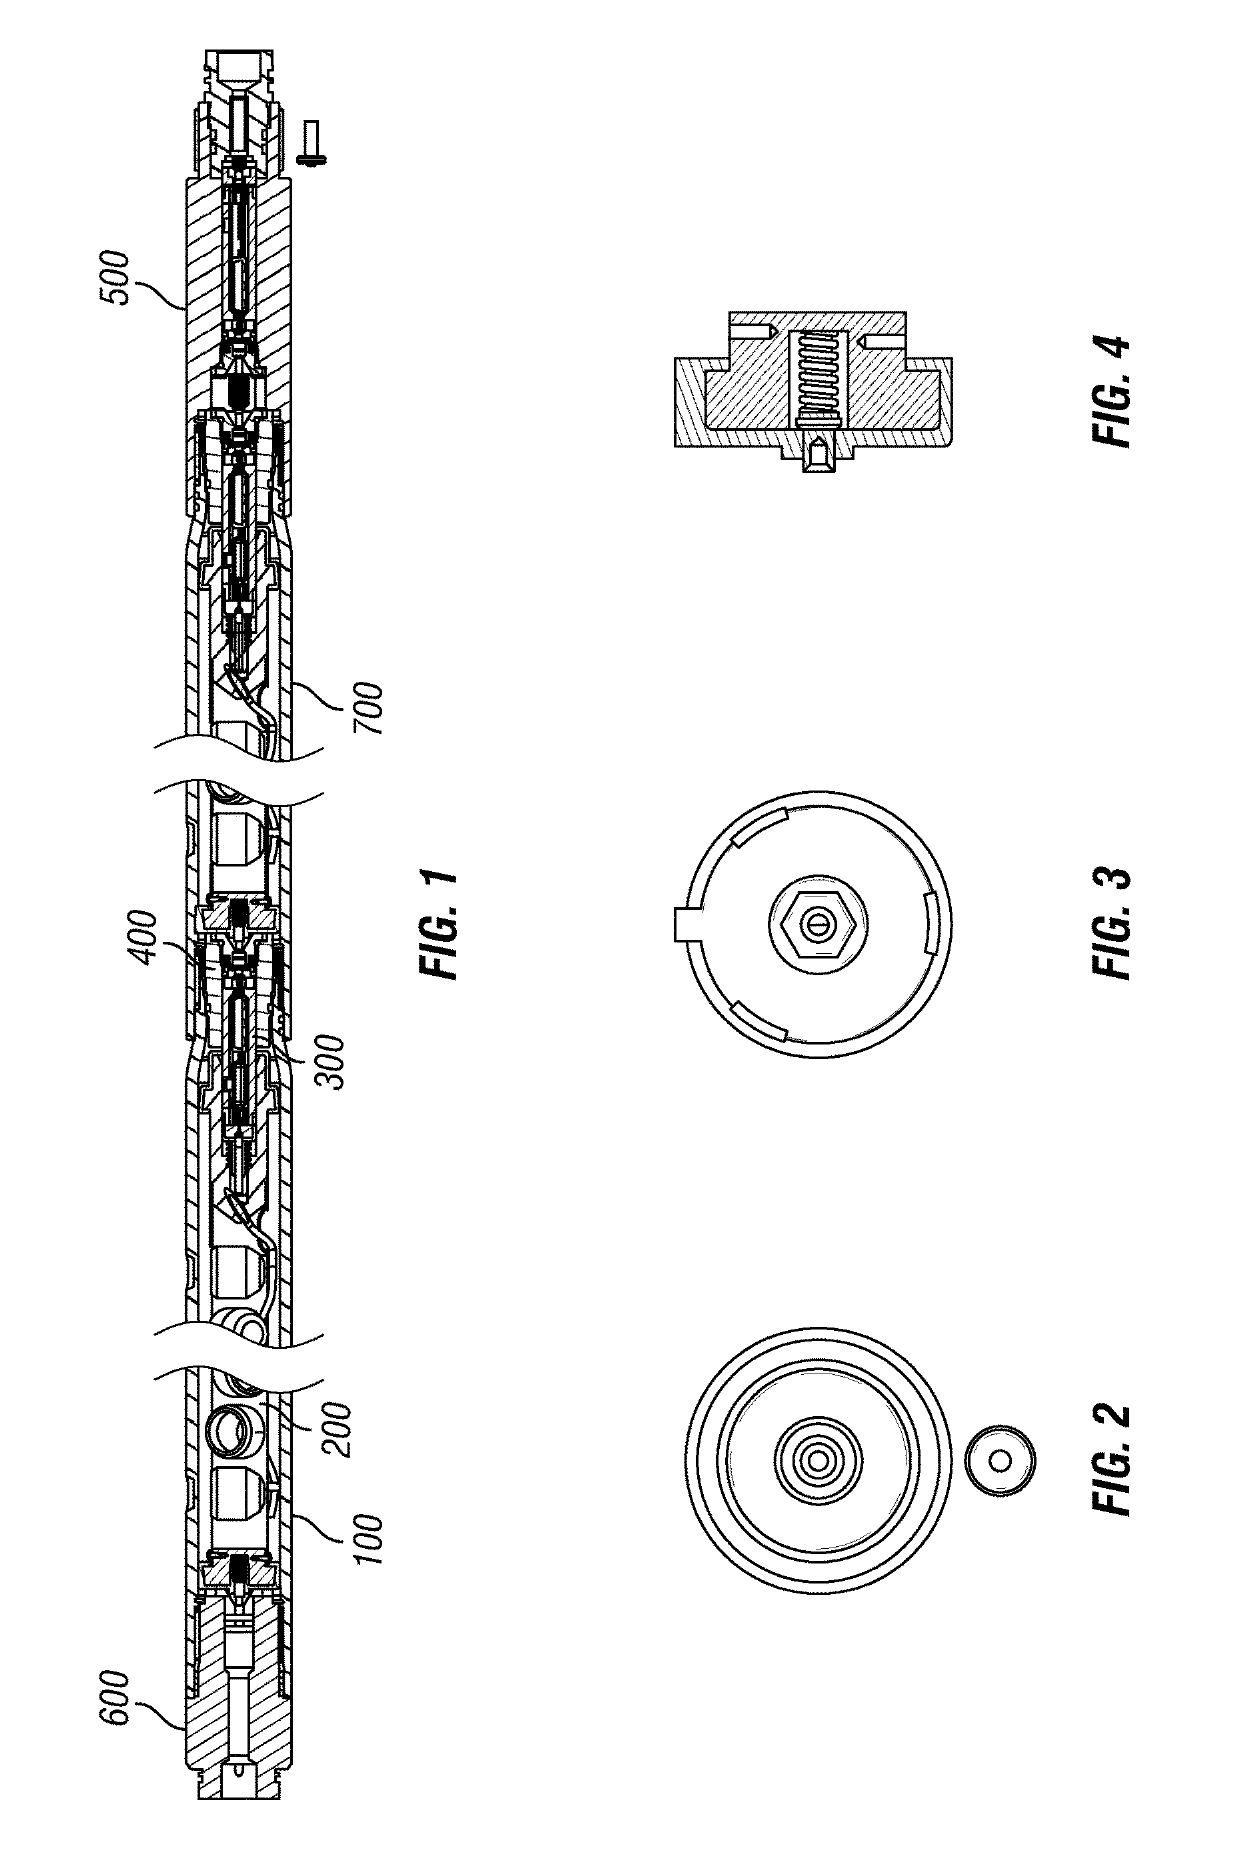 Box by pin perforating gun system and methods